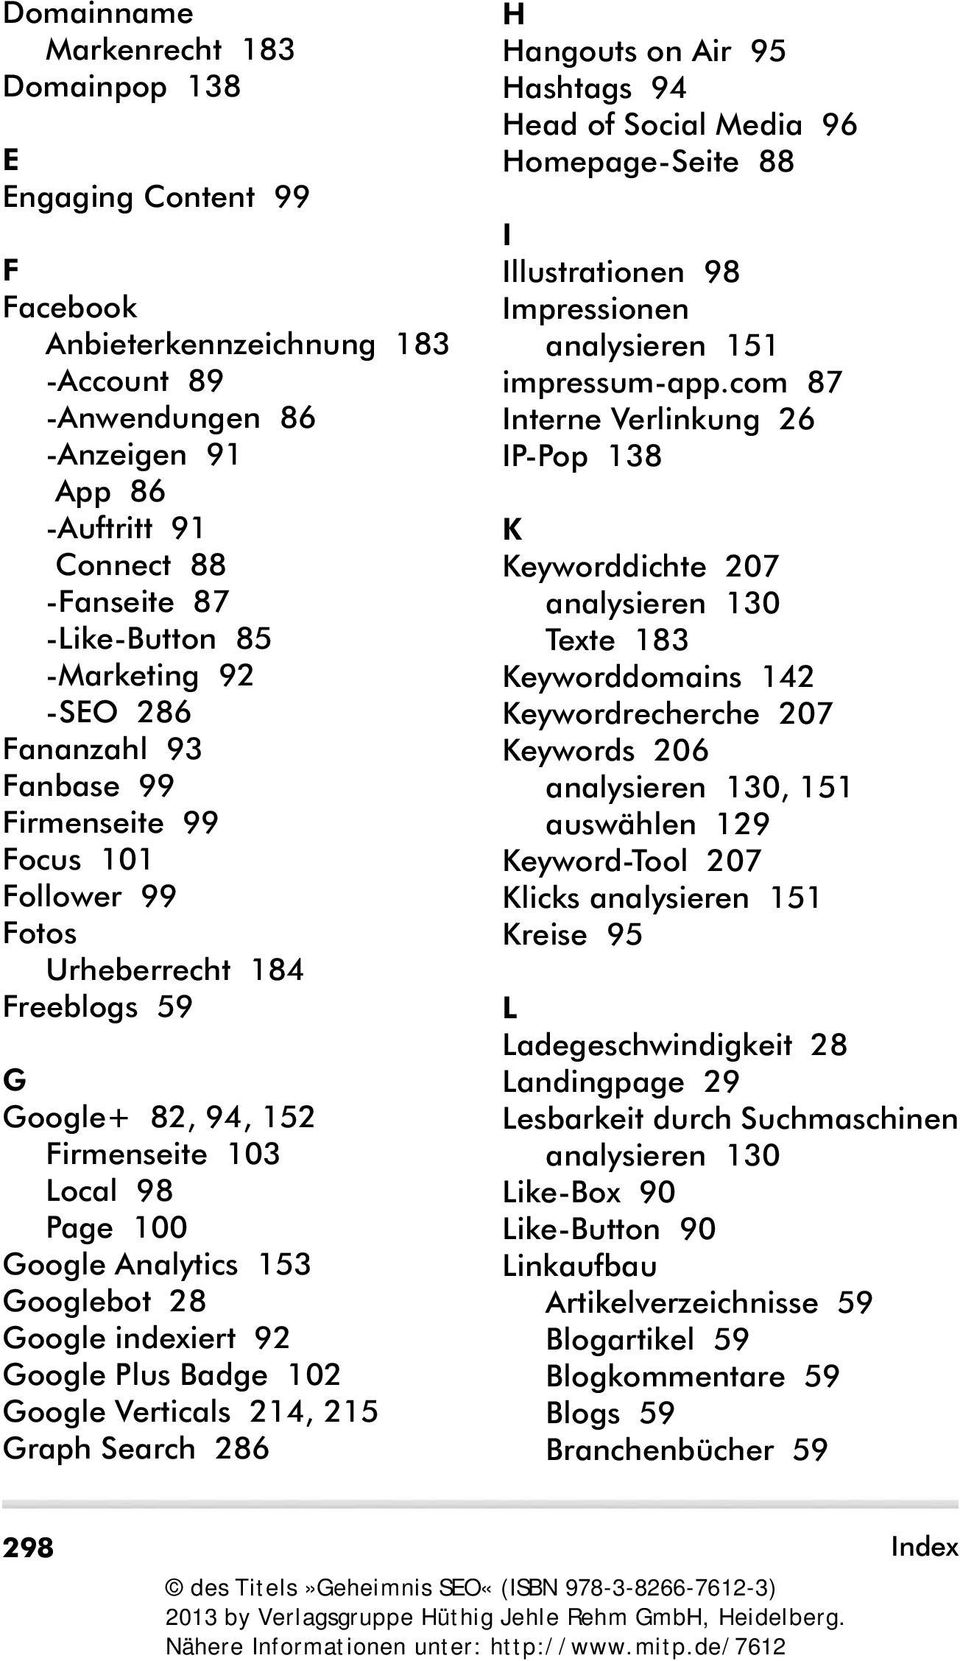 Googlebot 28 Google indexiert 92 Google Plus Badge 102 Google Verticals 214, 215 Graph Search 286 H Hangouts on Air 95 Hashtags 94 Head of Social Media 96 Homepage-Seite 88 I Illustrationen 98